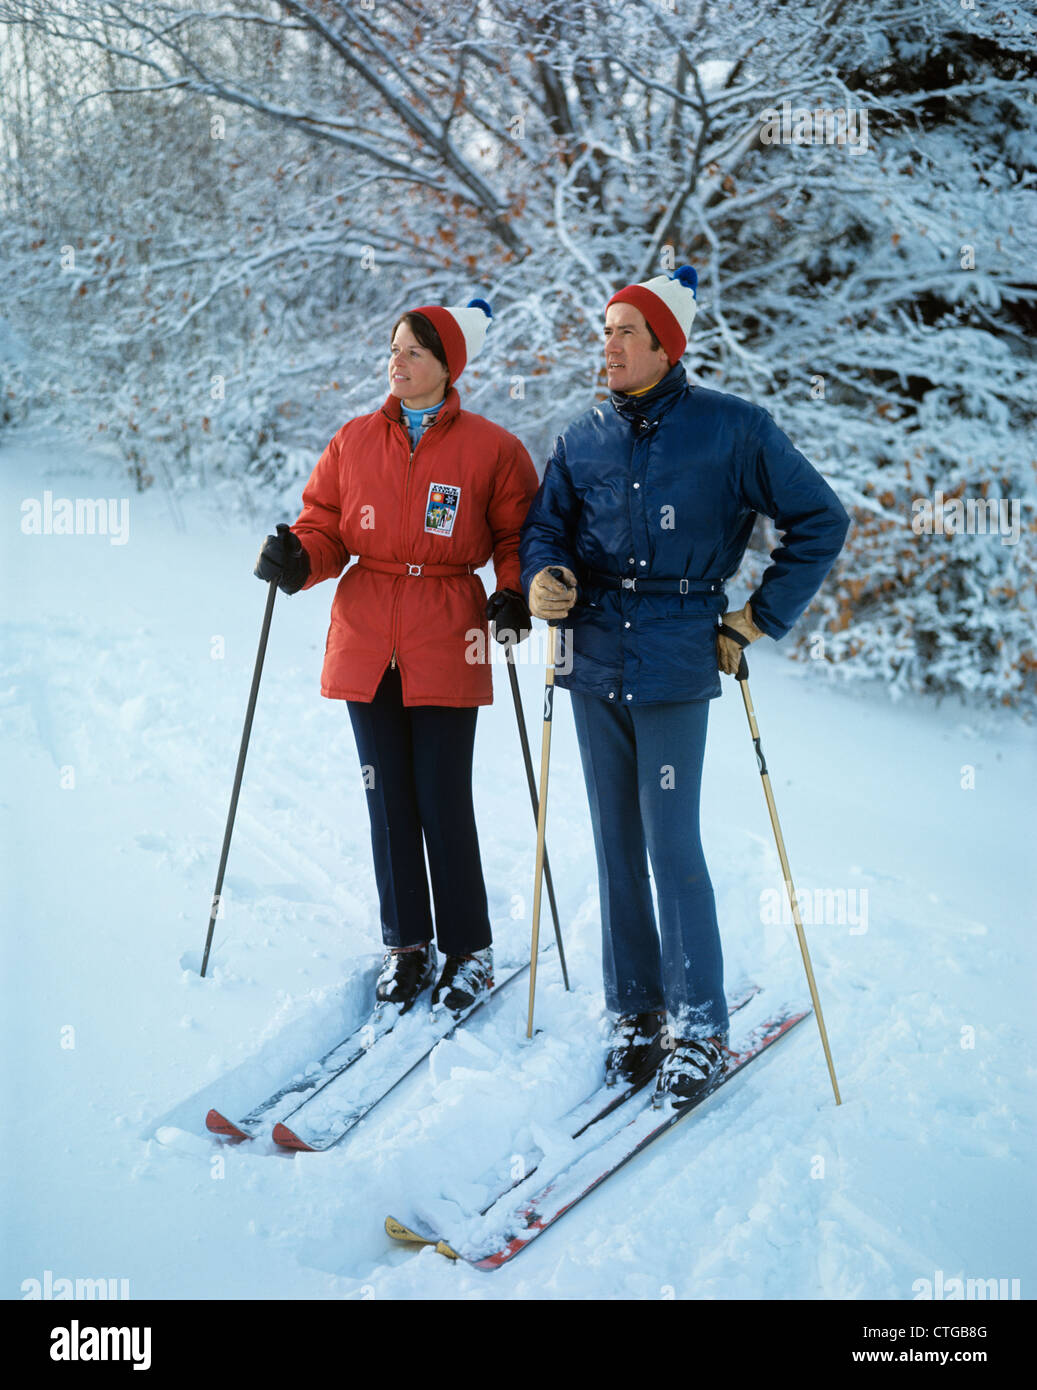 1970s FULL LENGTH COUPLE STANDING ON SKIS WOMAN RED JACKET MAN BLUE CLOTHES RETRO Stock Photo